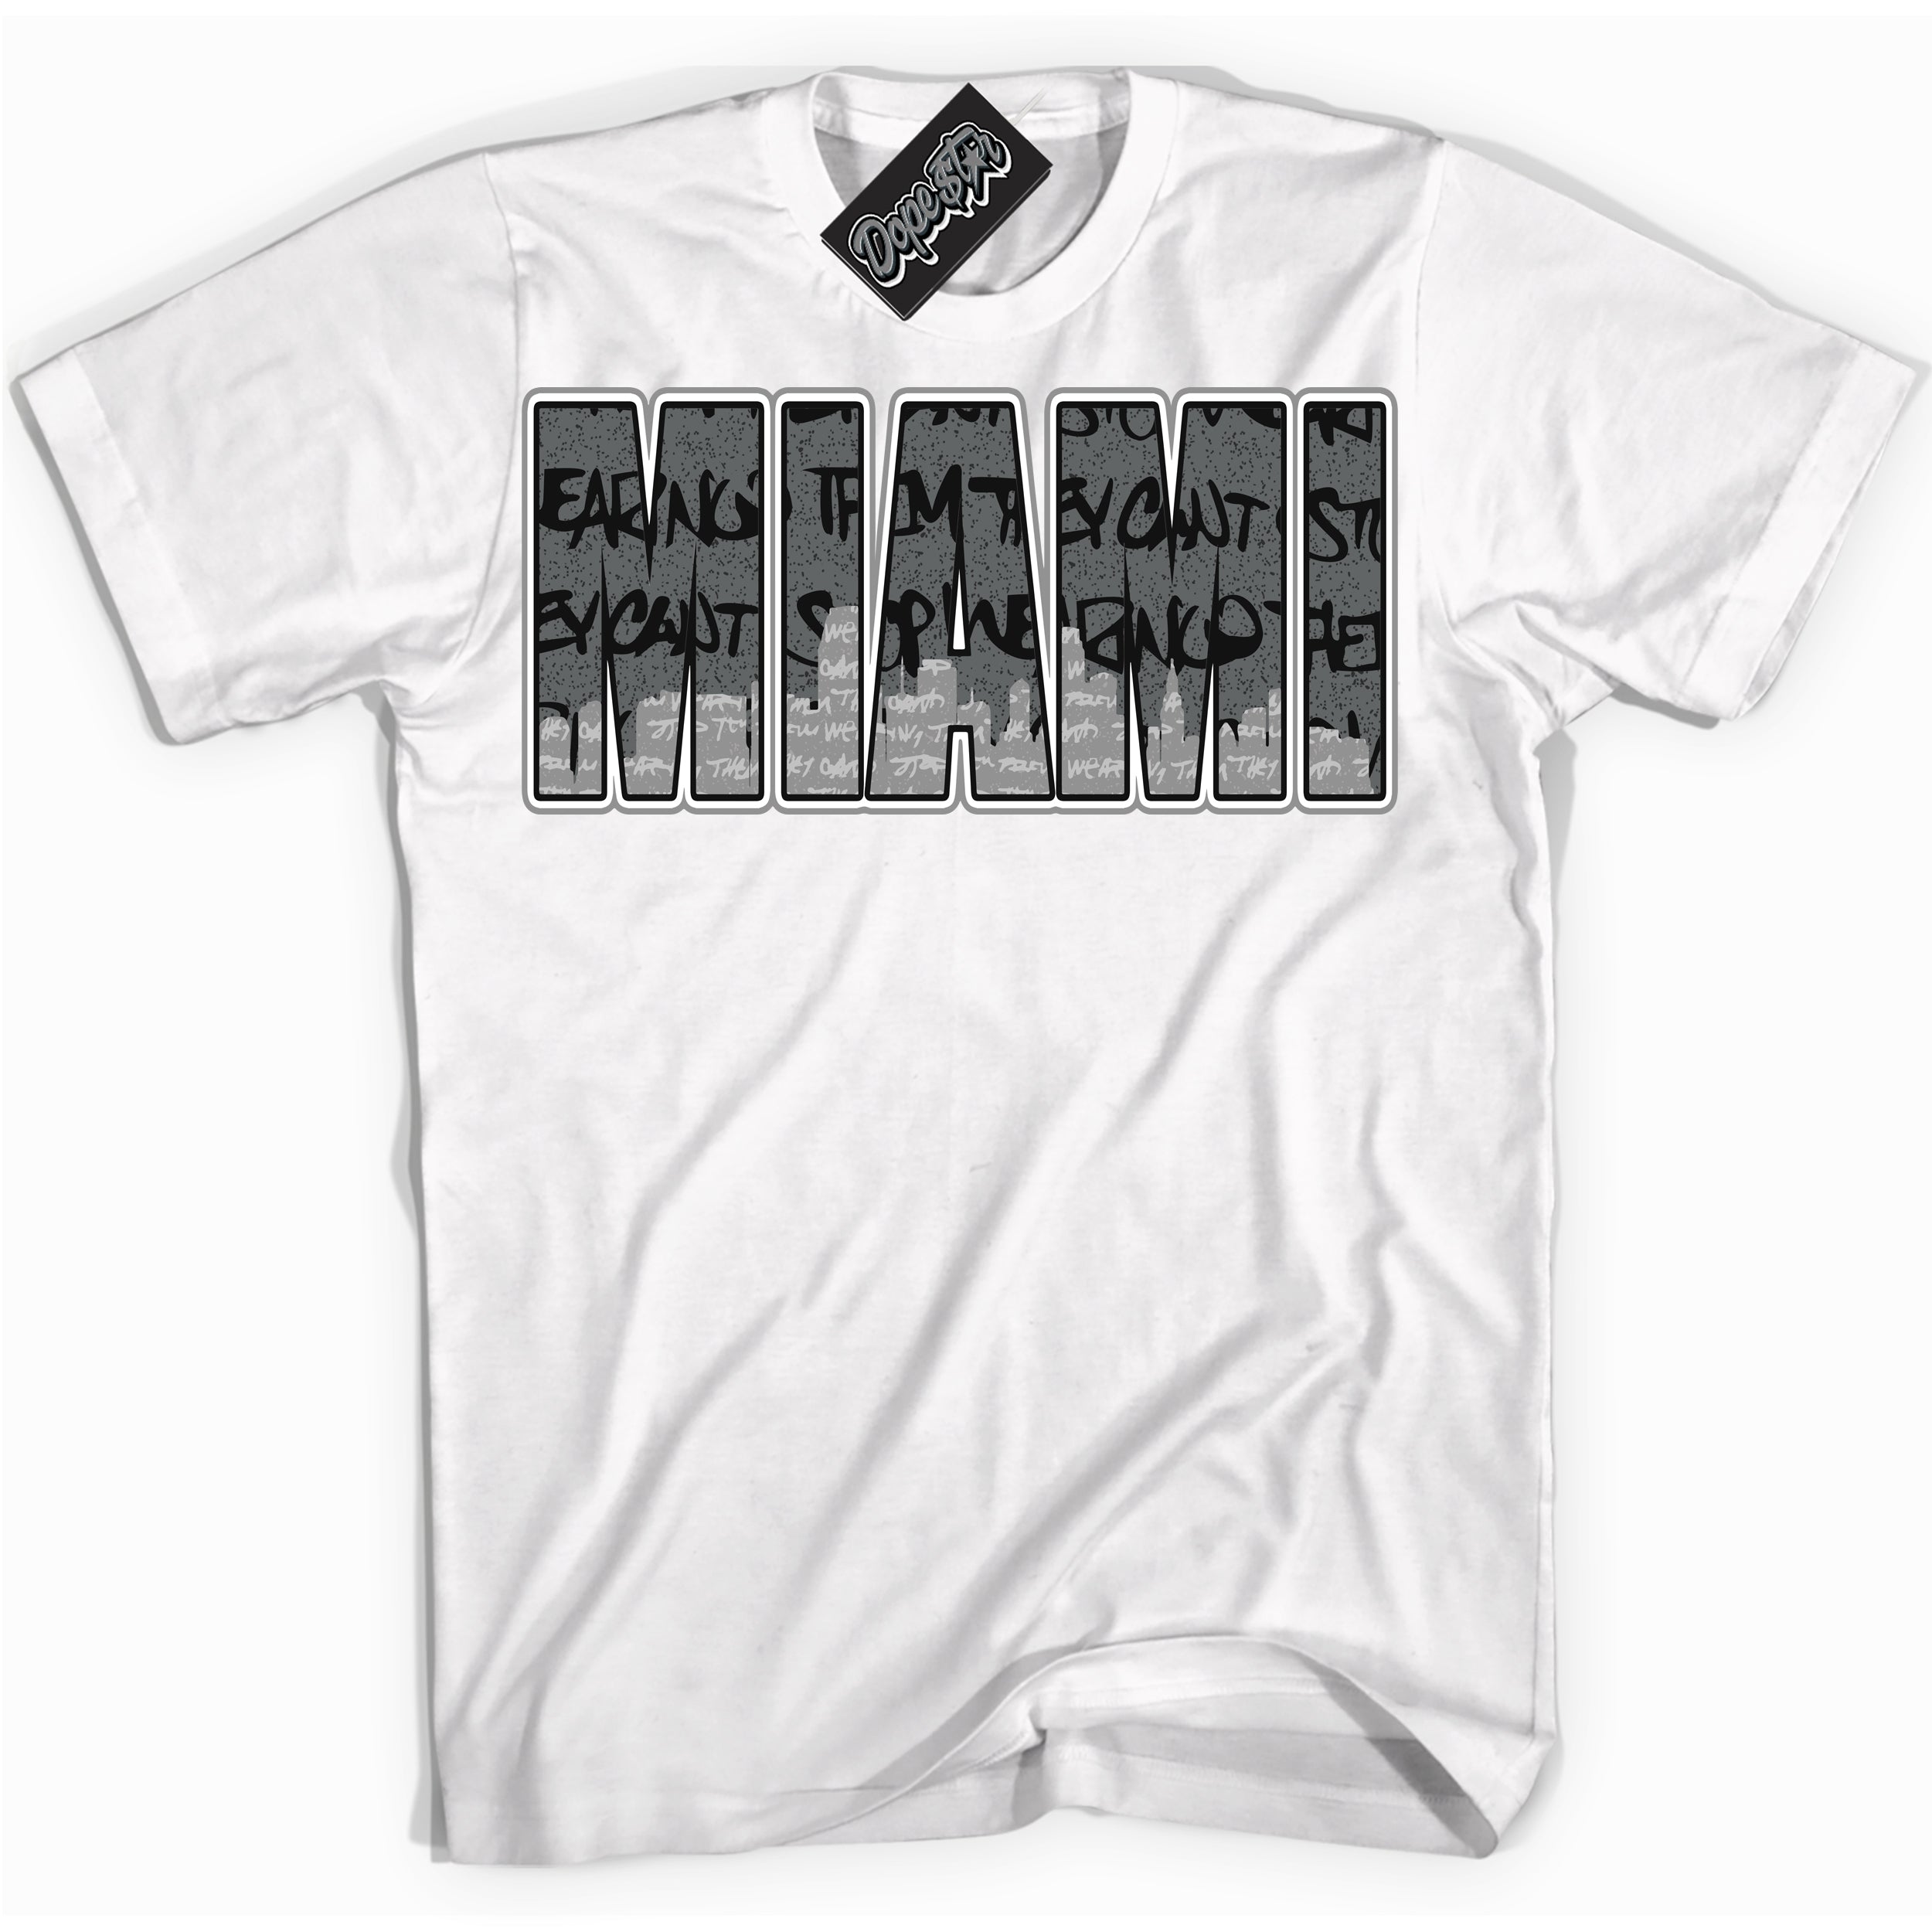 Cool White Shirt with “ Miami ” design that perfectly matches Rebellionaire 1s Sneakers.